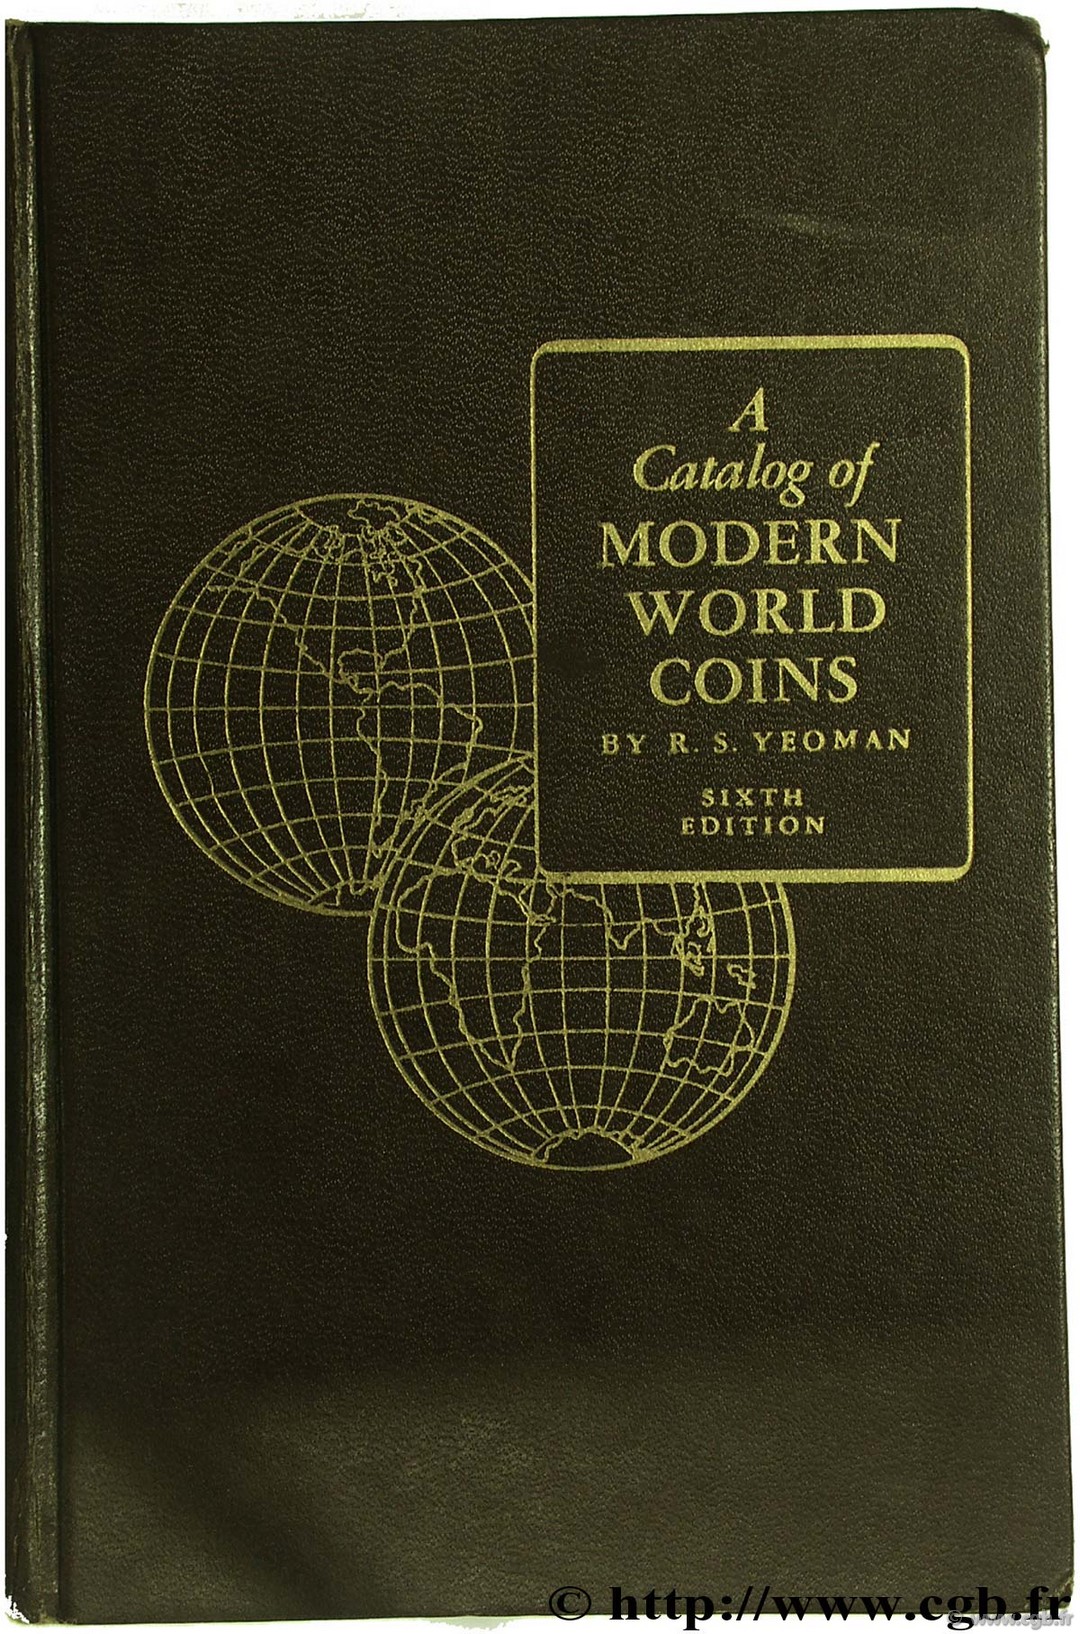 A catalog of Modern World Coins 1850-1964 first edition YEOMAN R.-S.